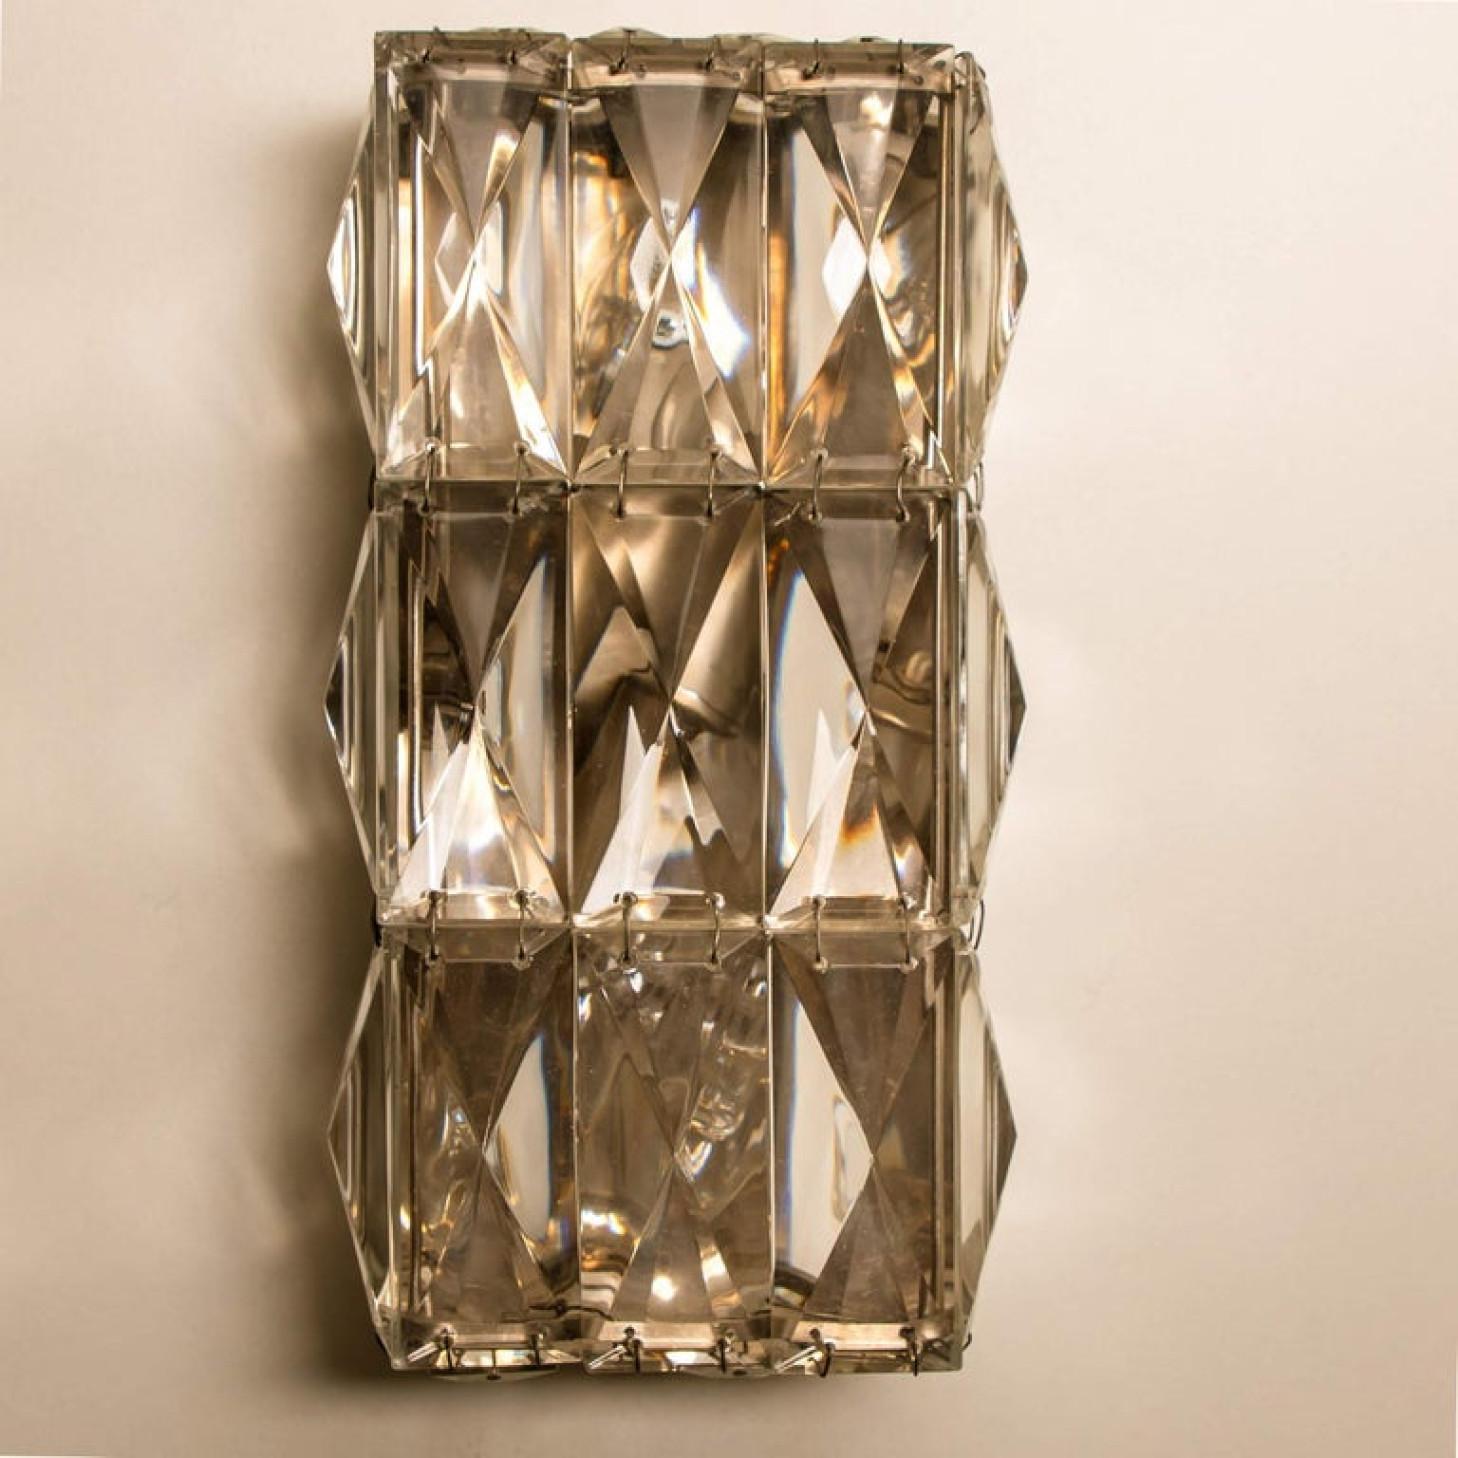 Pair of Palwa Wall Light Fixtures, Chrome-Plated Crystal Glass, 1970 For Sale 5